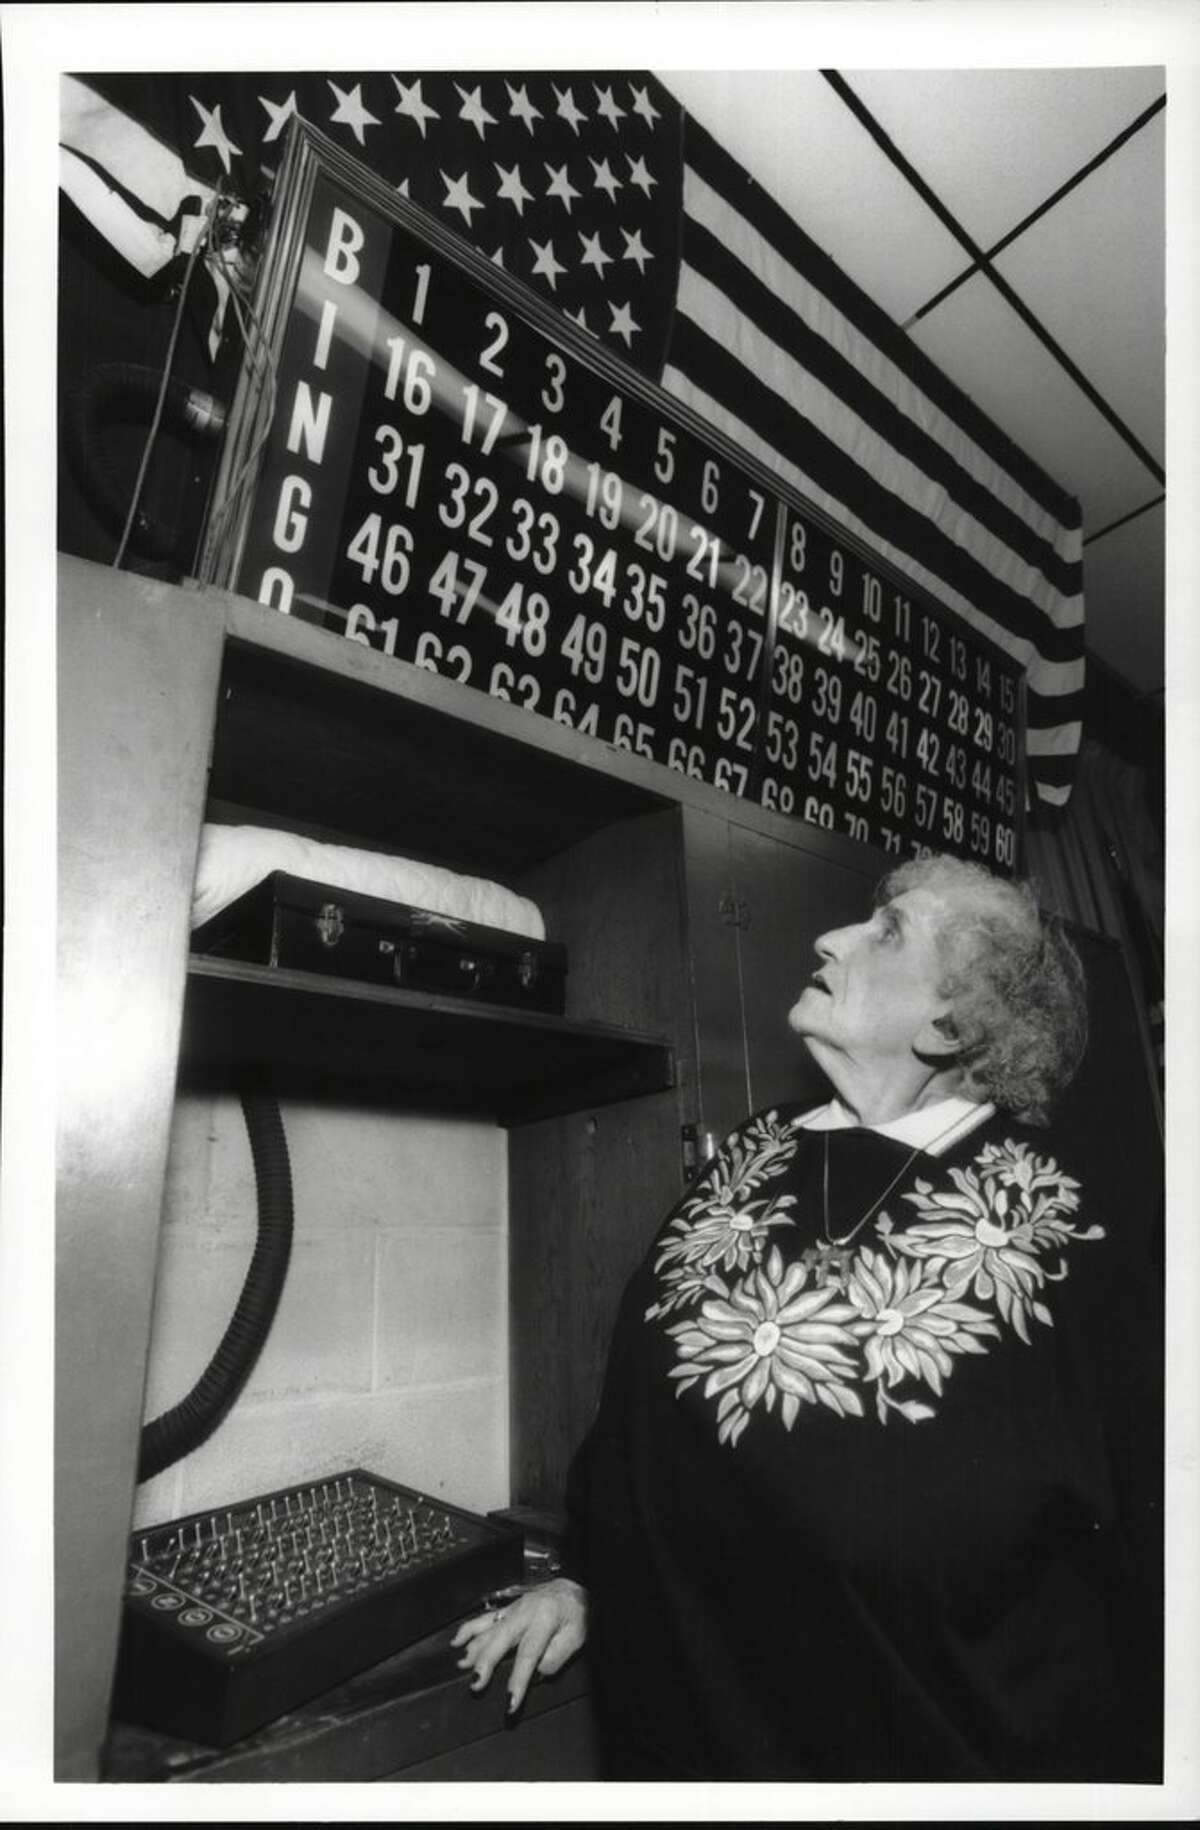 Ancient Order of Hiberians Hall, Quail Street, Albany, New York - Mrs. Bingo, Hilda Gordon, one of the congregation who runs Wednesday night bingo for Ohav Shalom. Hilda is working the number board keeping track of the numbers called. January 19, 1994 (Luanne M. Ferris/Times Union Archive)